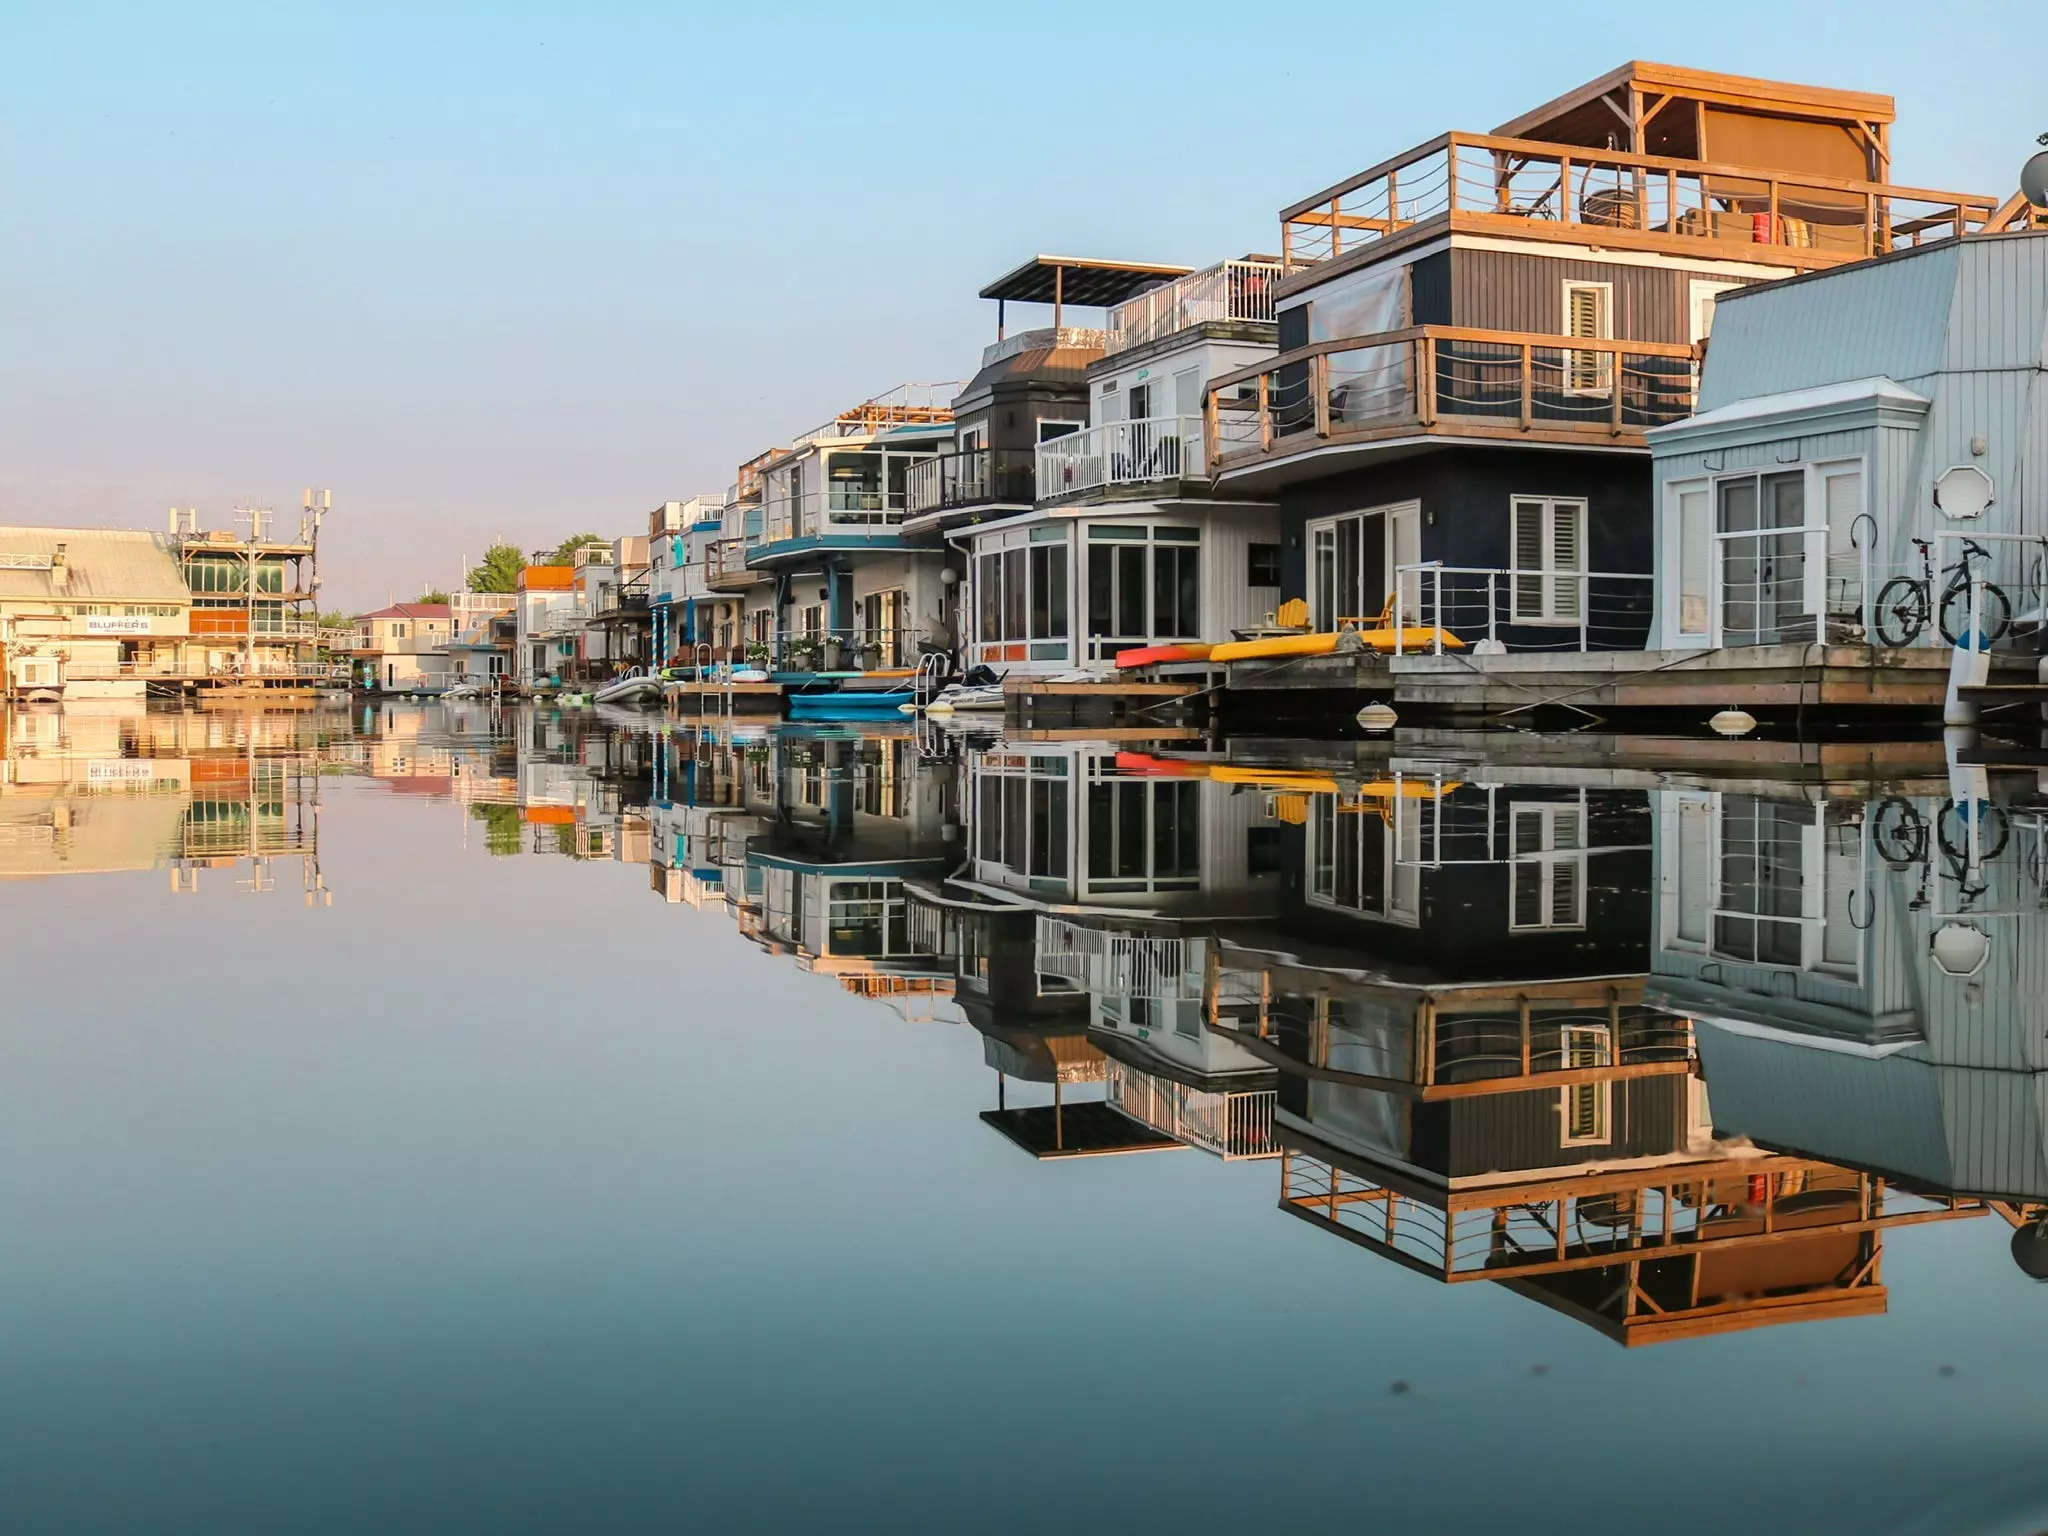 A row of floating homes and houseboats.